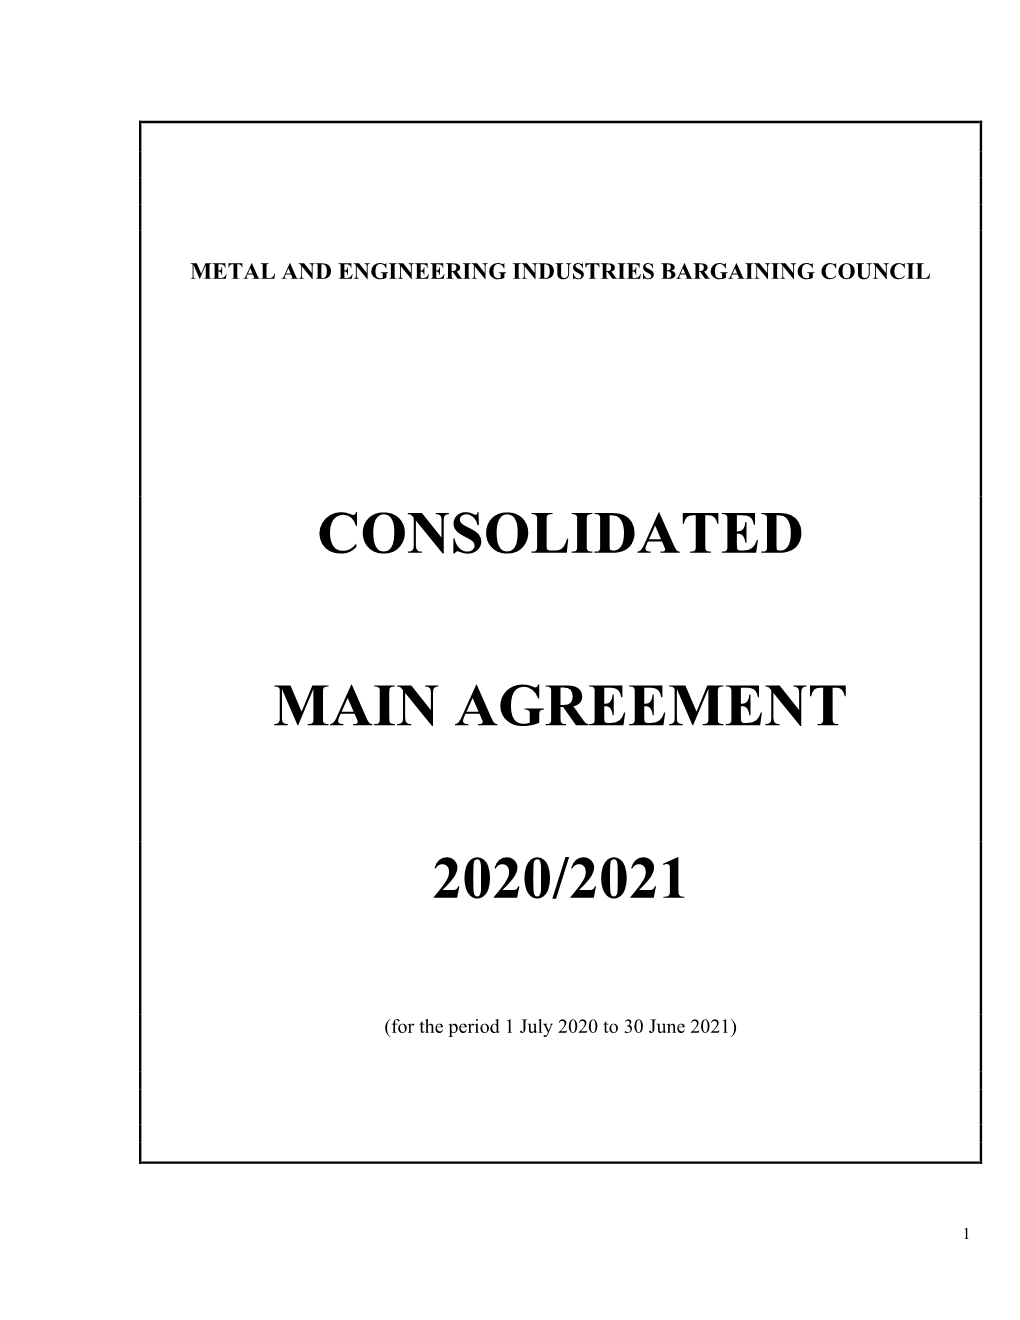 Consolidated Main Agreement 2020/2021